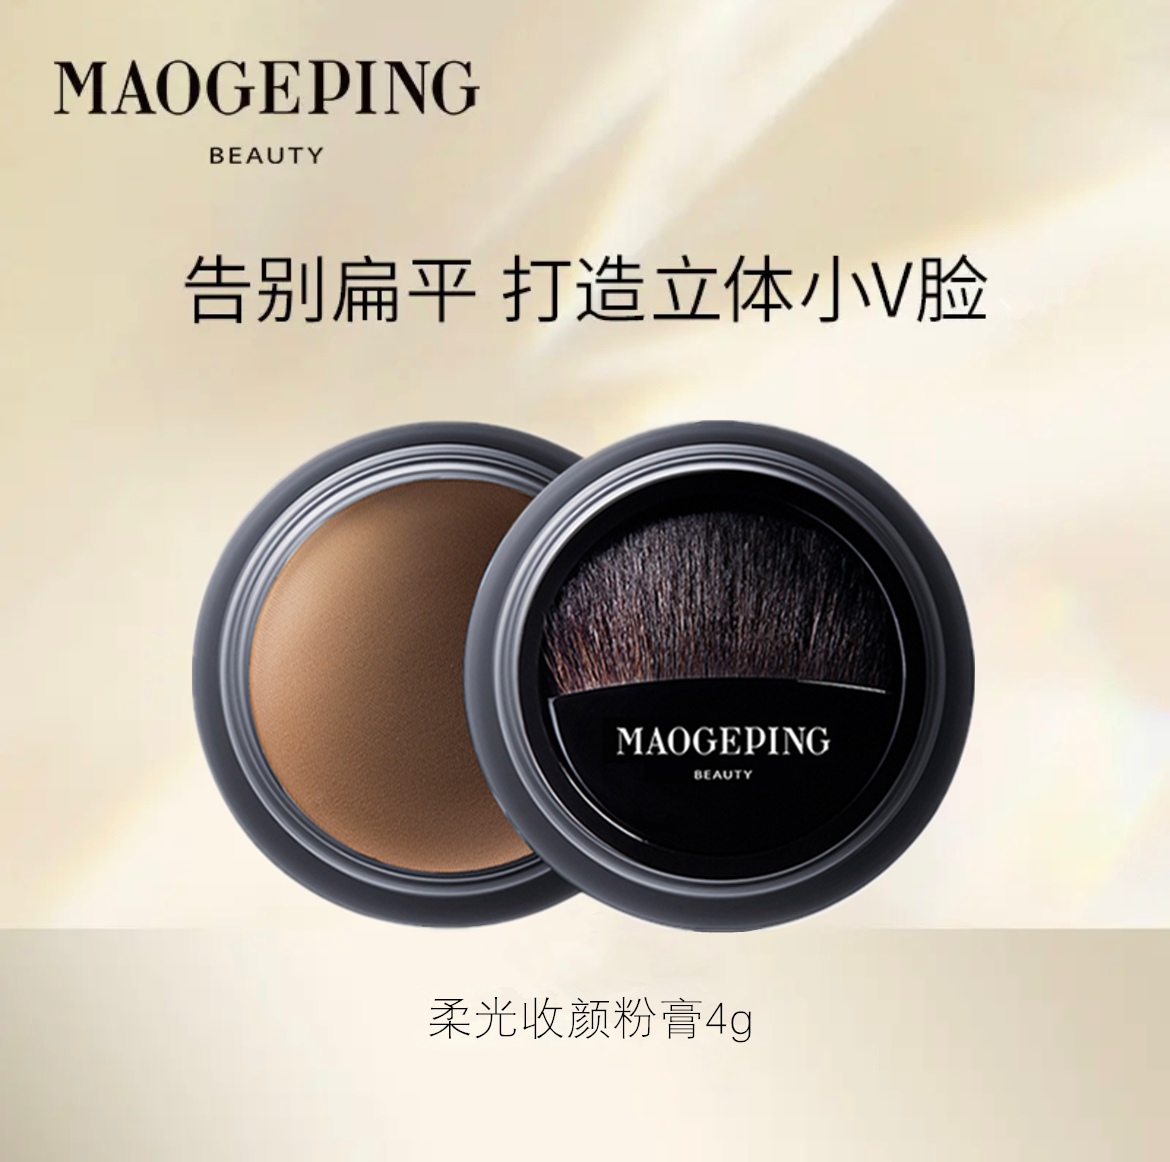 MAOGEPING soft light Hairline Filling & Modification Nose Shadow & Shadow Silhouette Slimming Face powder毛戈平柔光收颜发际线填充修饰鼻影阴影侧影瘦脸粉膏 4g